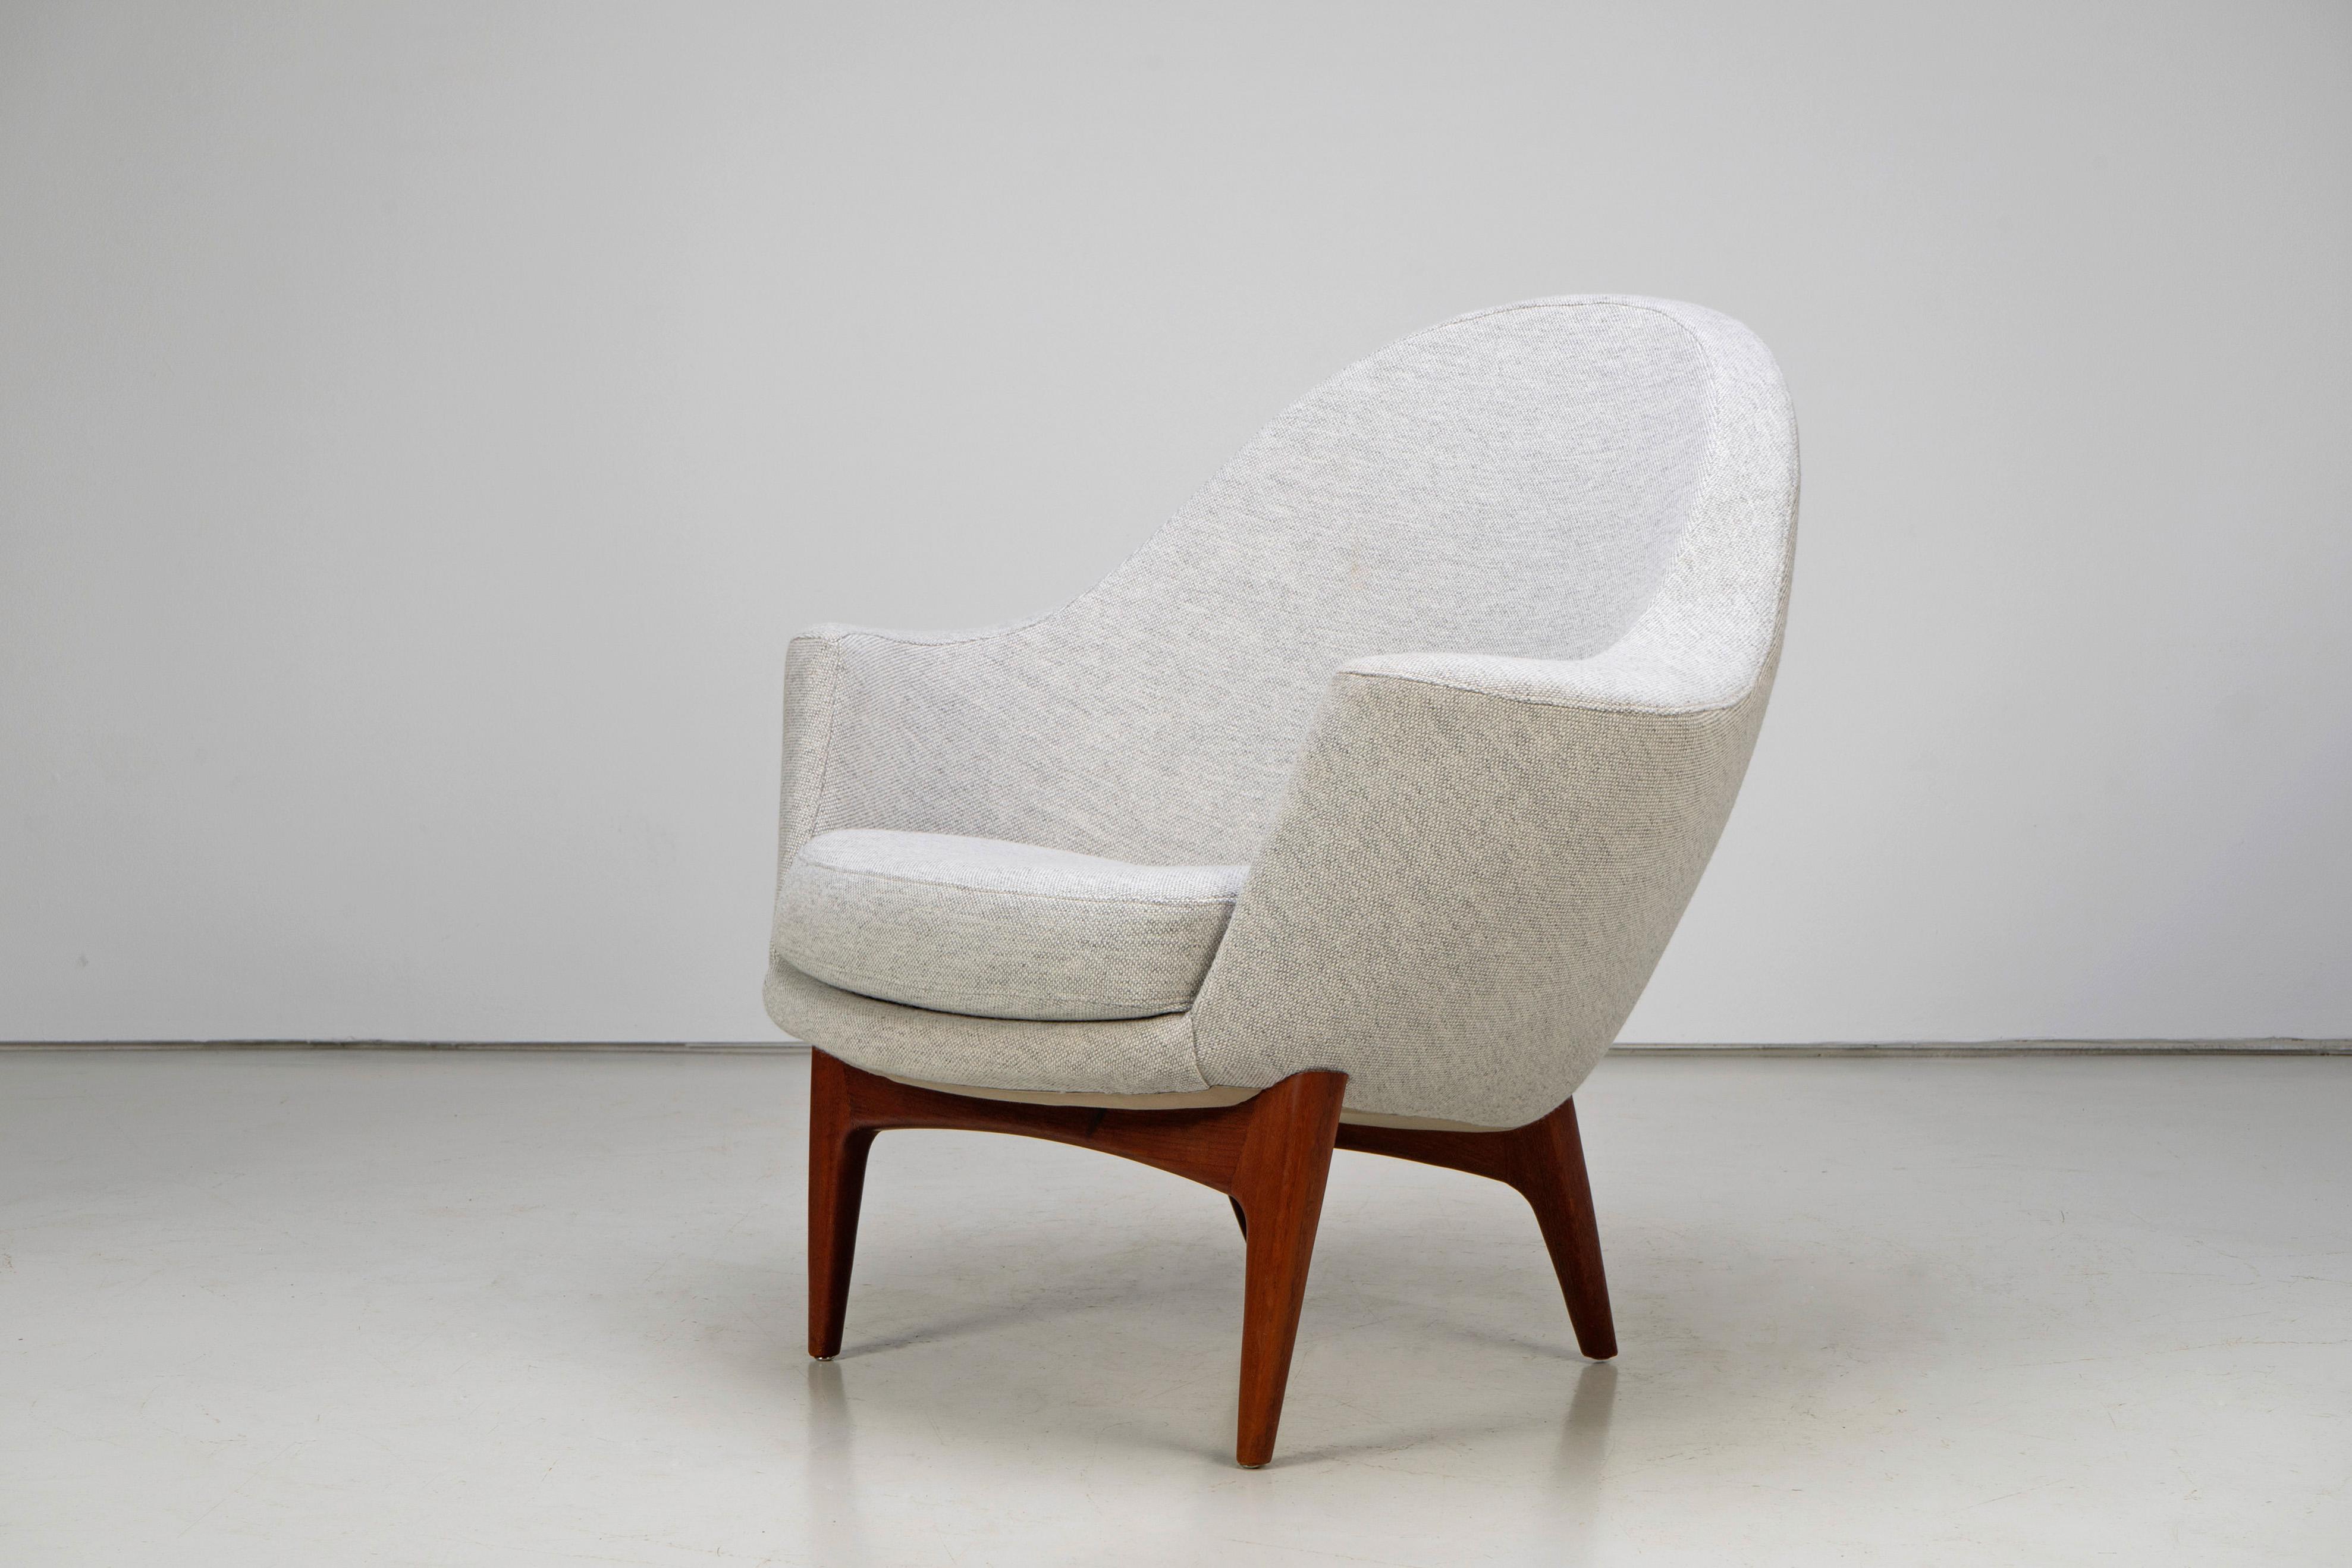 Rare Pair of Lounge Chairs by Ib Kofod Larsen for Fritz Hansen, 1959 For Sale 2